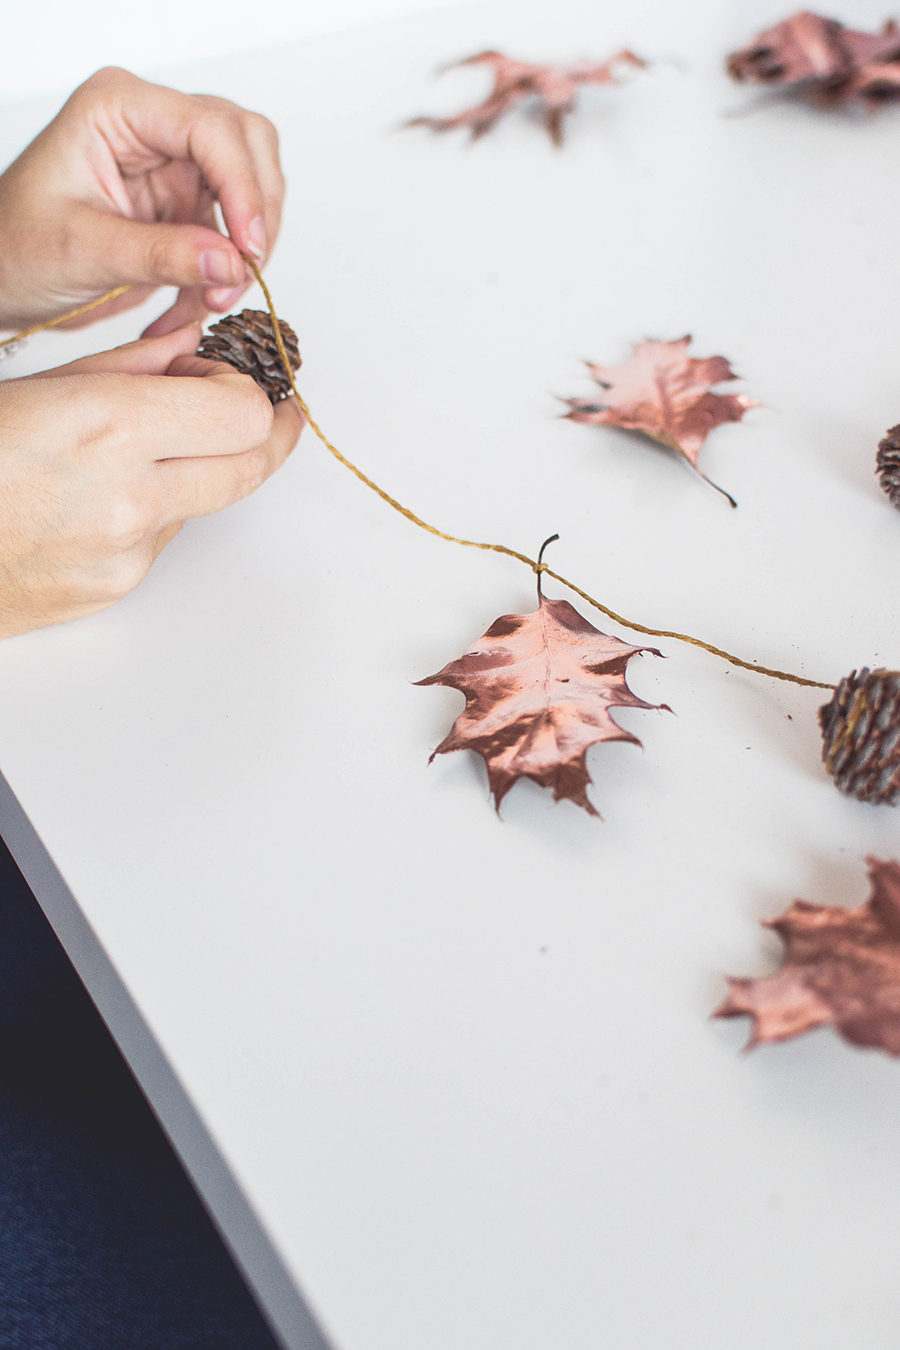 Create an Autumn garland with pinecones and leaves